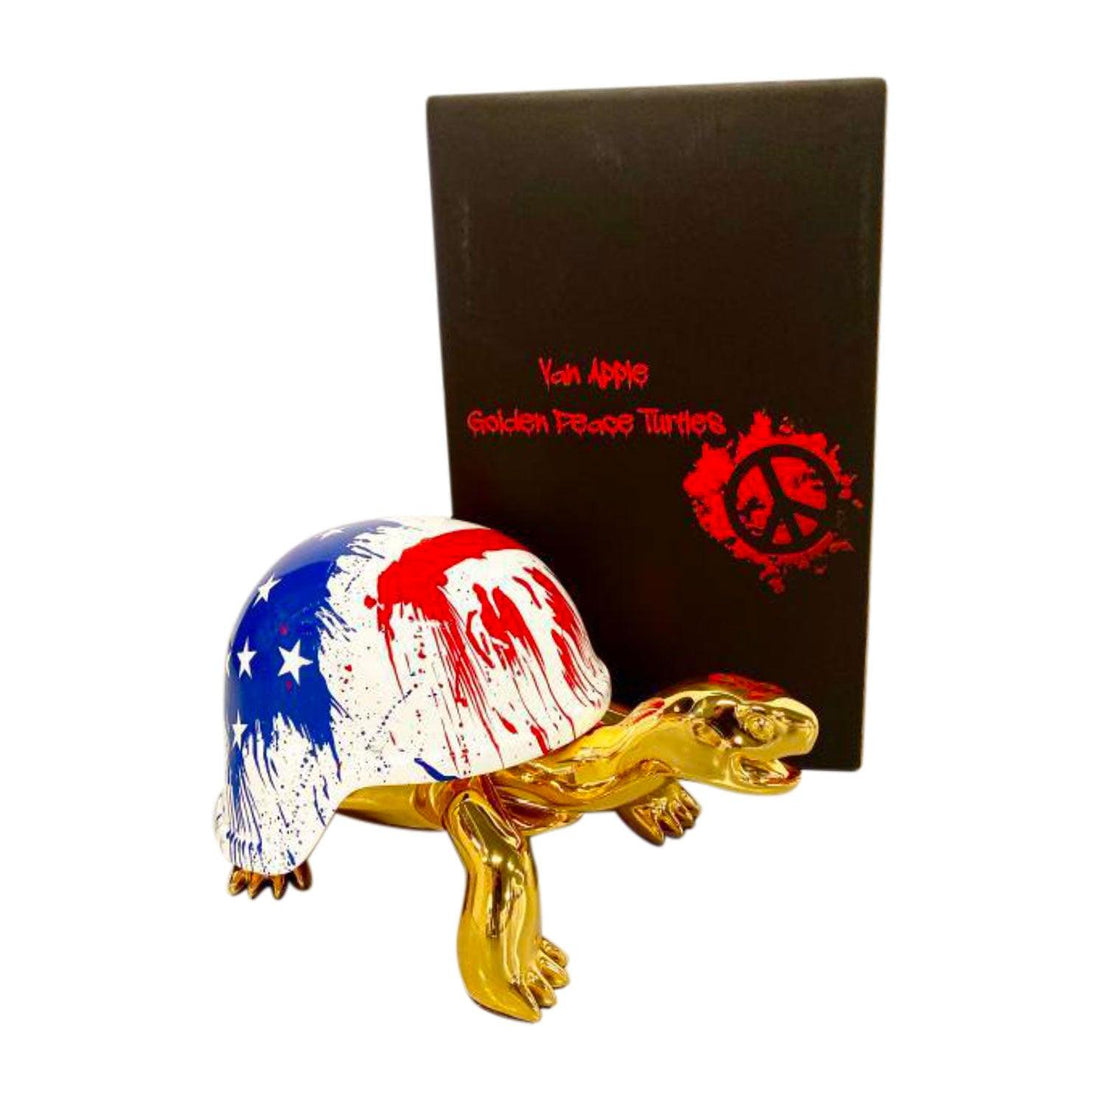 The Golden Peace Turtle The American Dream